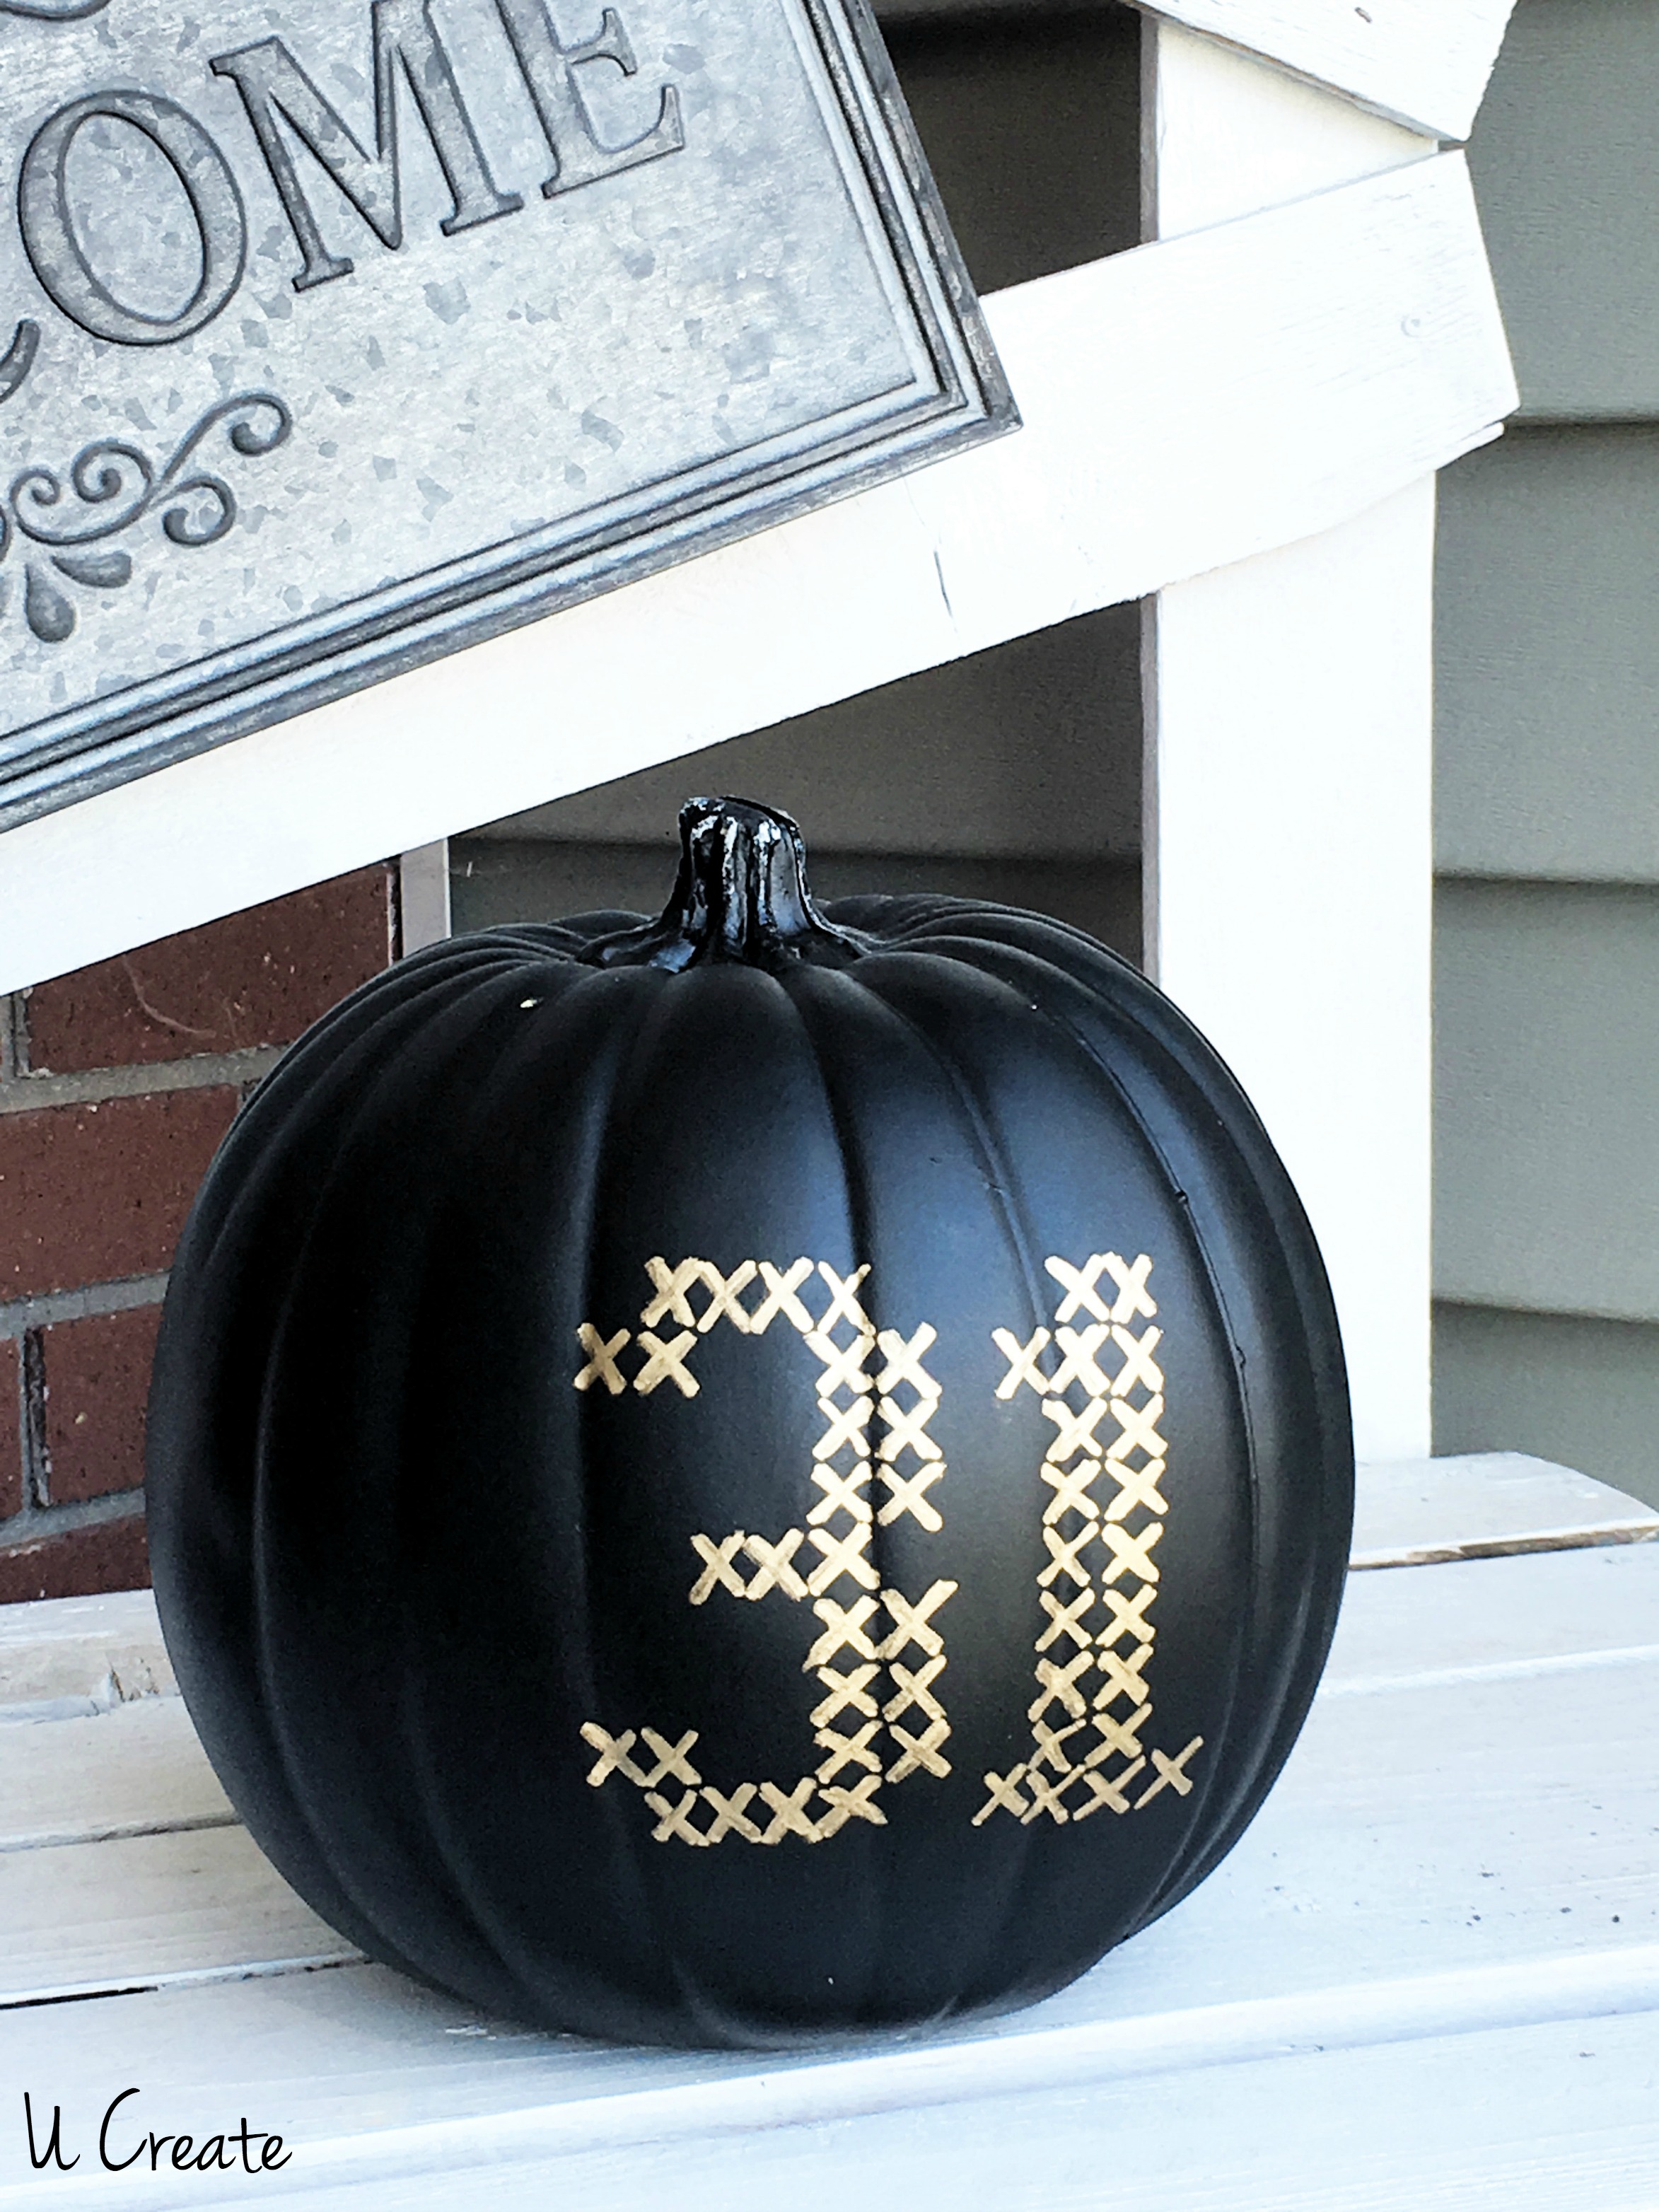 DIY Paint Stitched Pumpkins with free printable templates by U Create